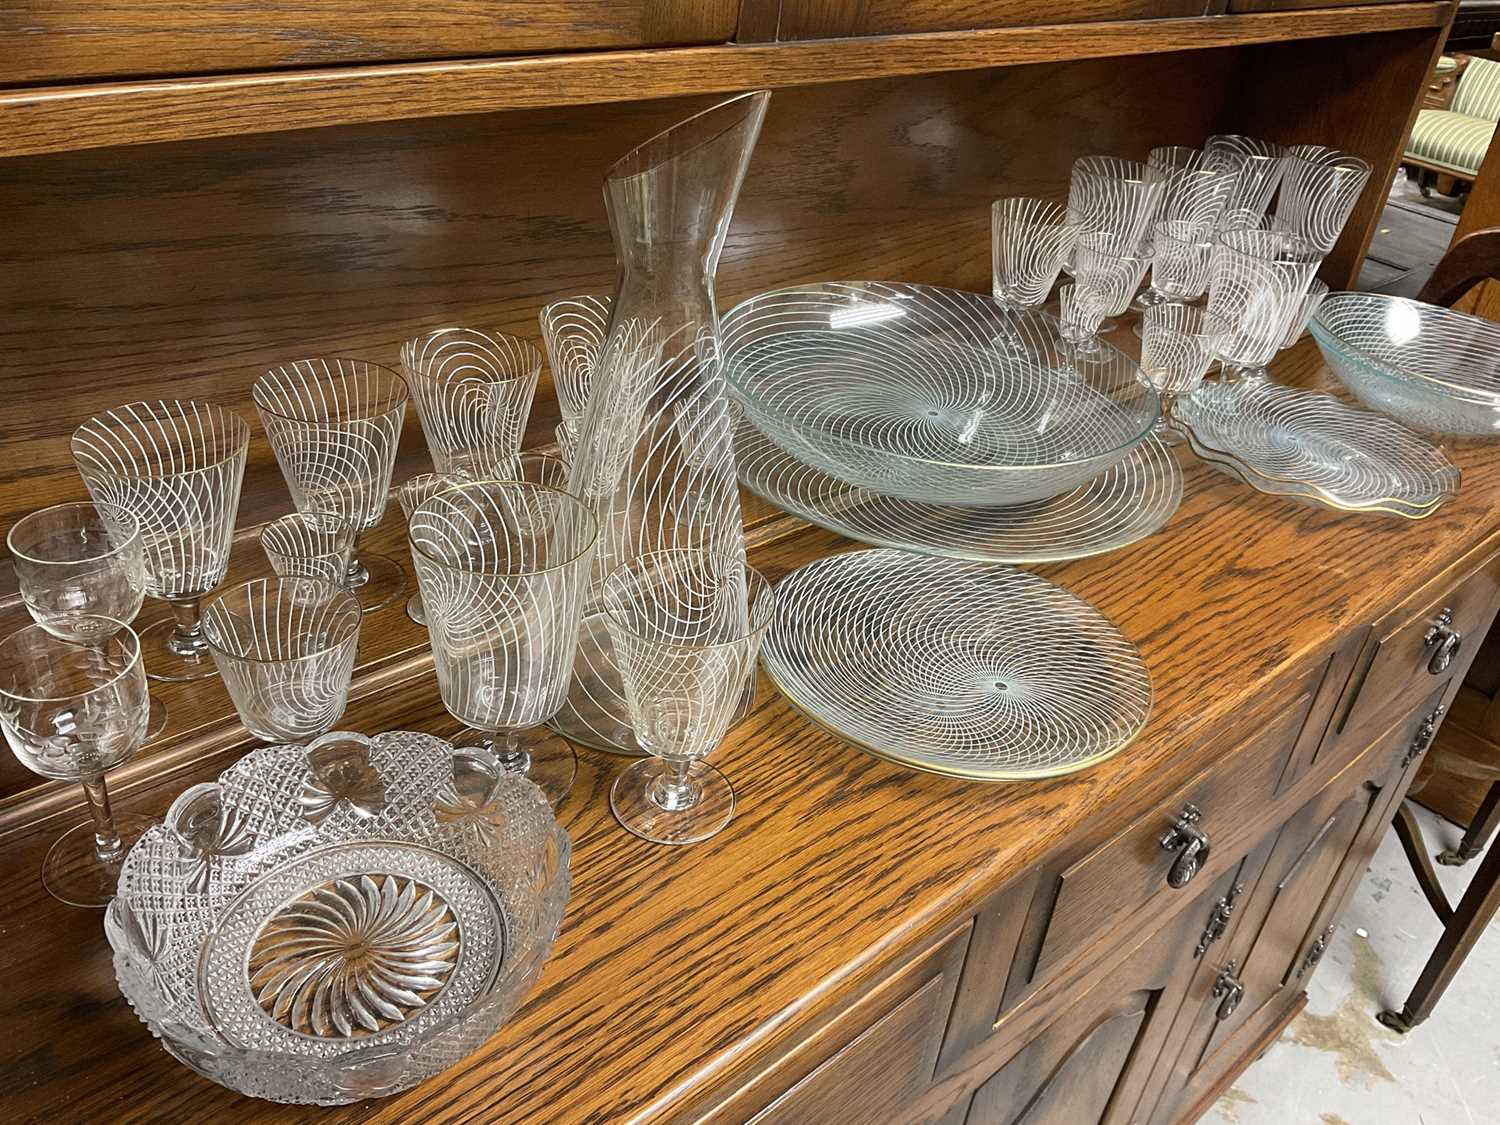 Lot 165 - Collection of Vintage Swirl design glassware by Chance